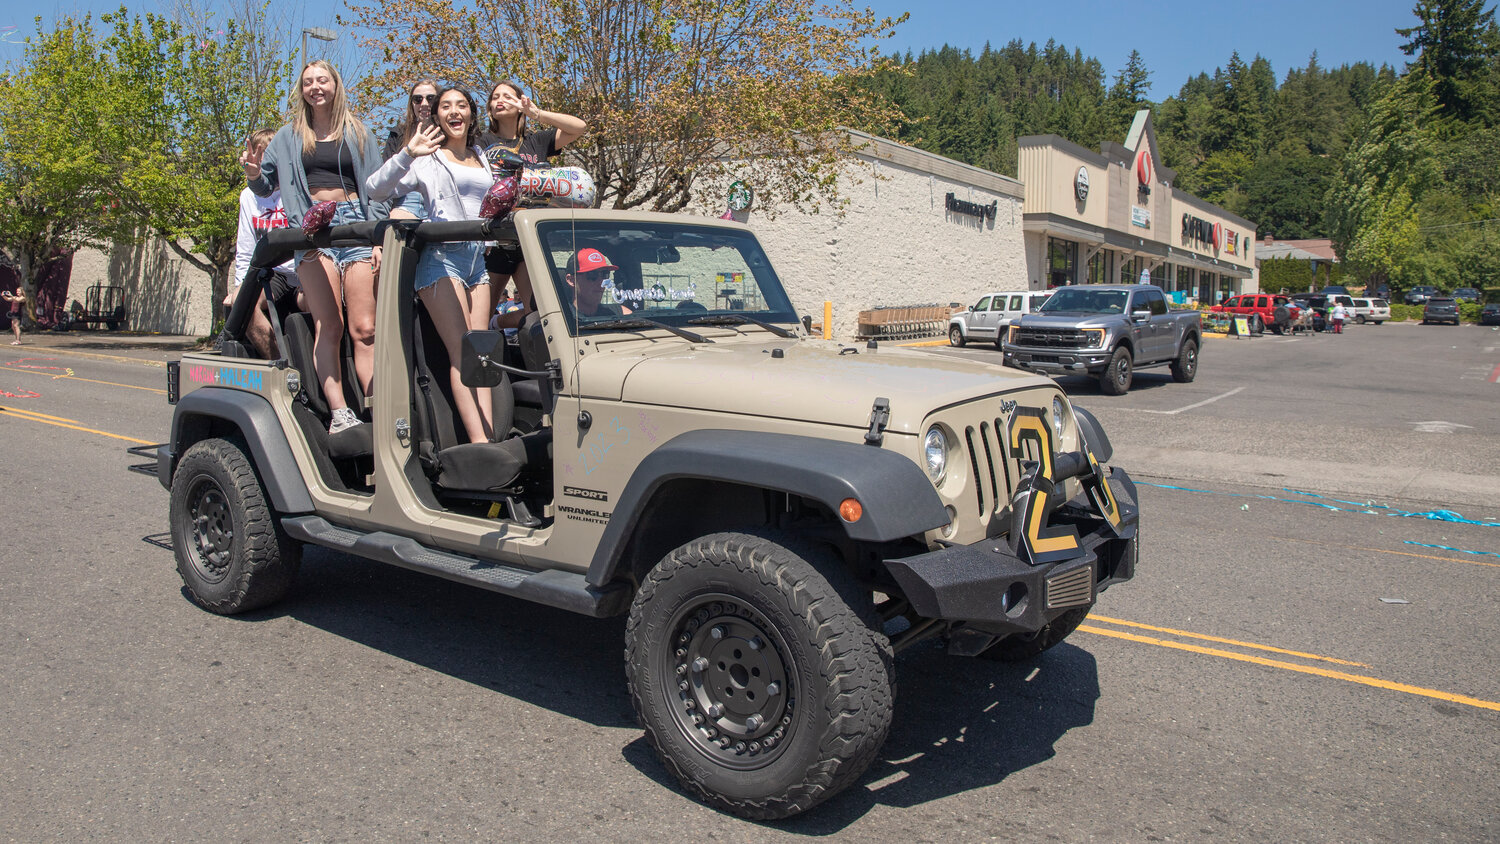 W.F. West High School seniors smile and stand in a Jeep rolling through Chehalis during a parade honoring future graduates on Sunday, June 4.